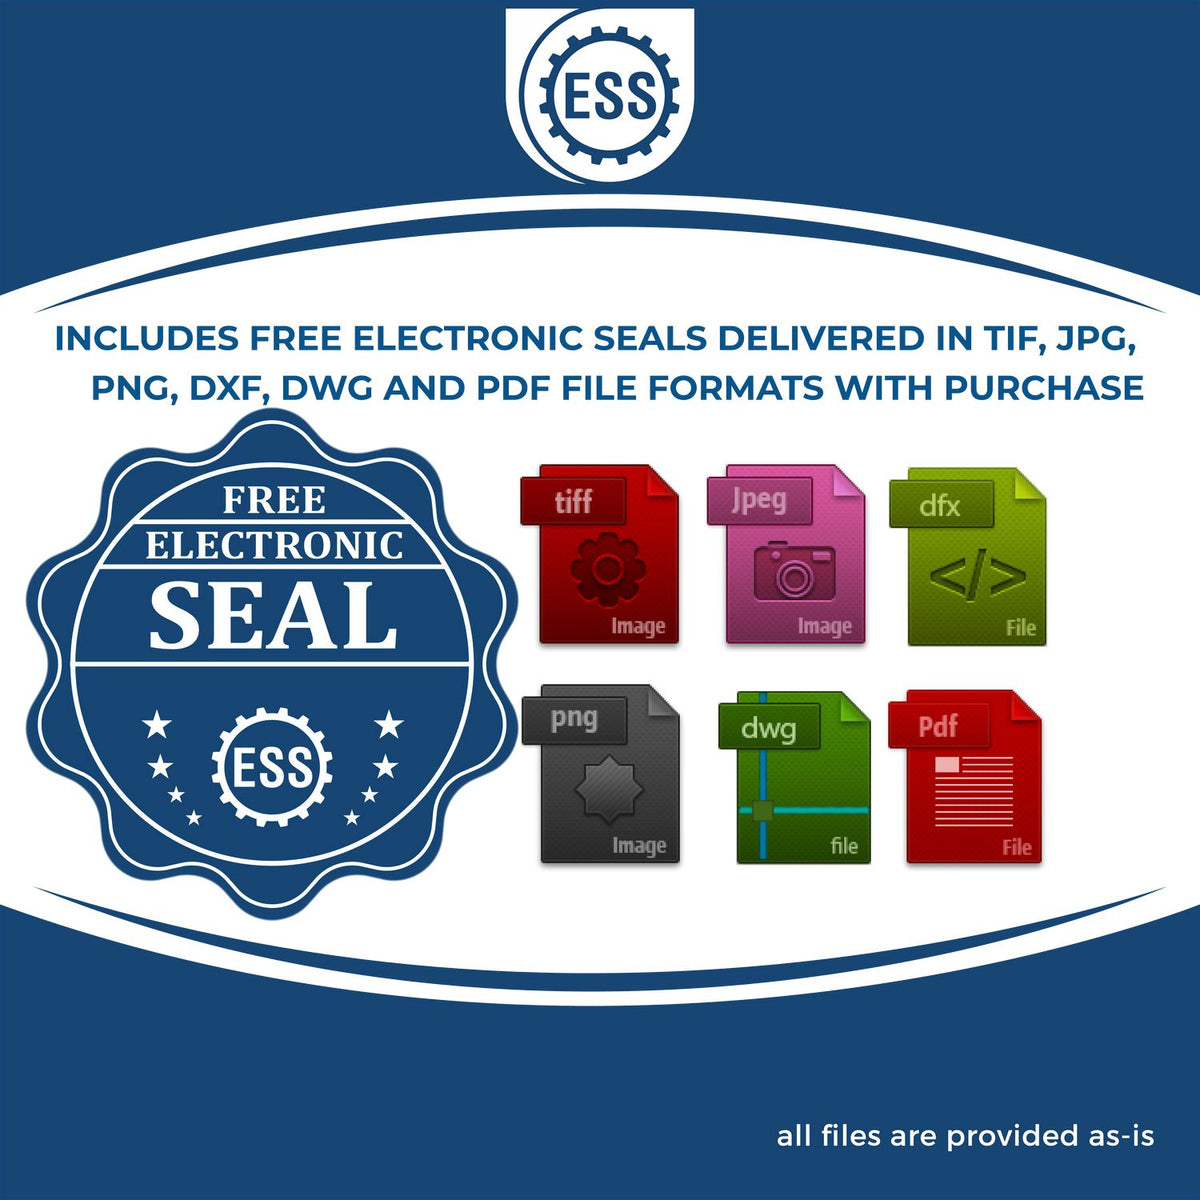 An infographic for the free electronic seal for the State of New York Architectural Seal Embosser illustrating the different file type icons such as DXF, DWG, TIF, JPG and PNG.